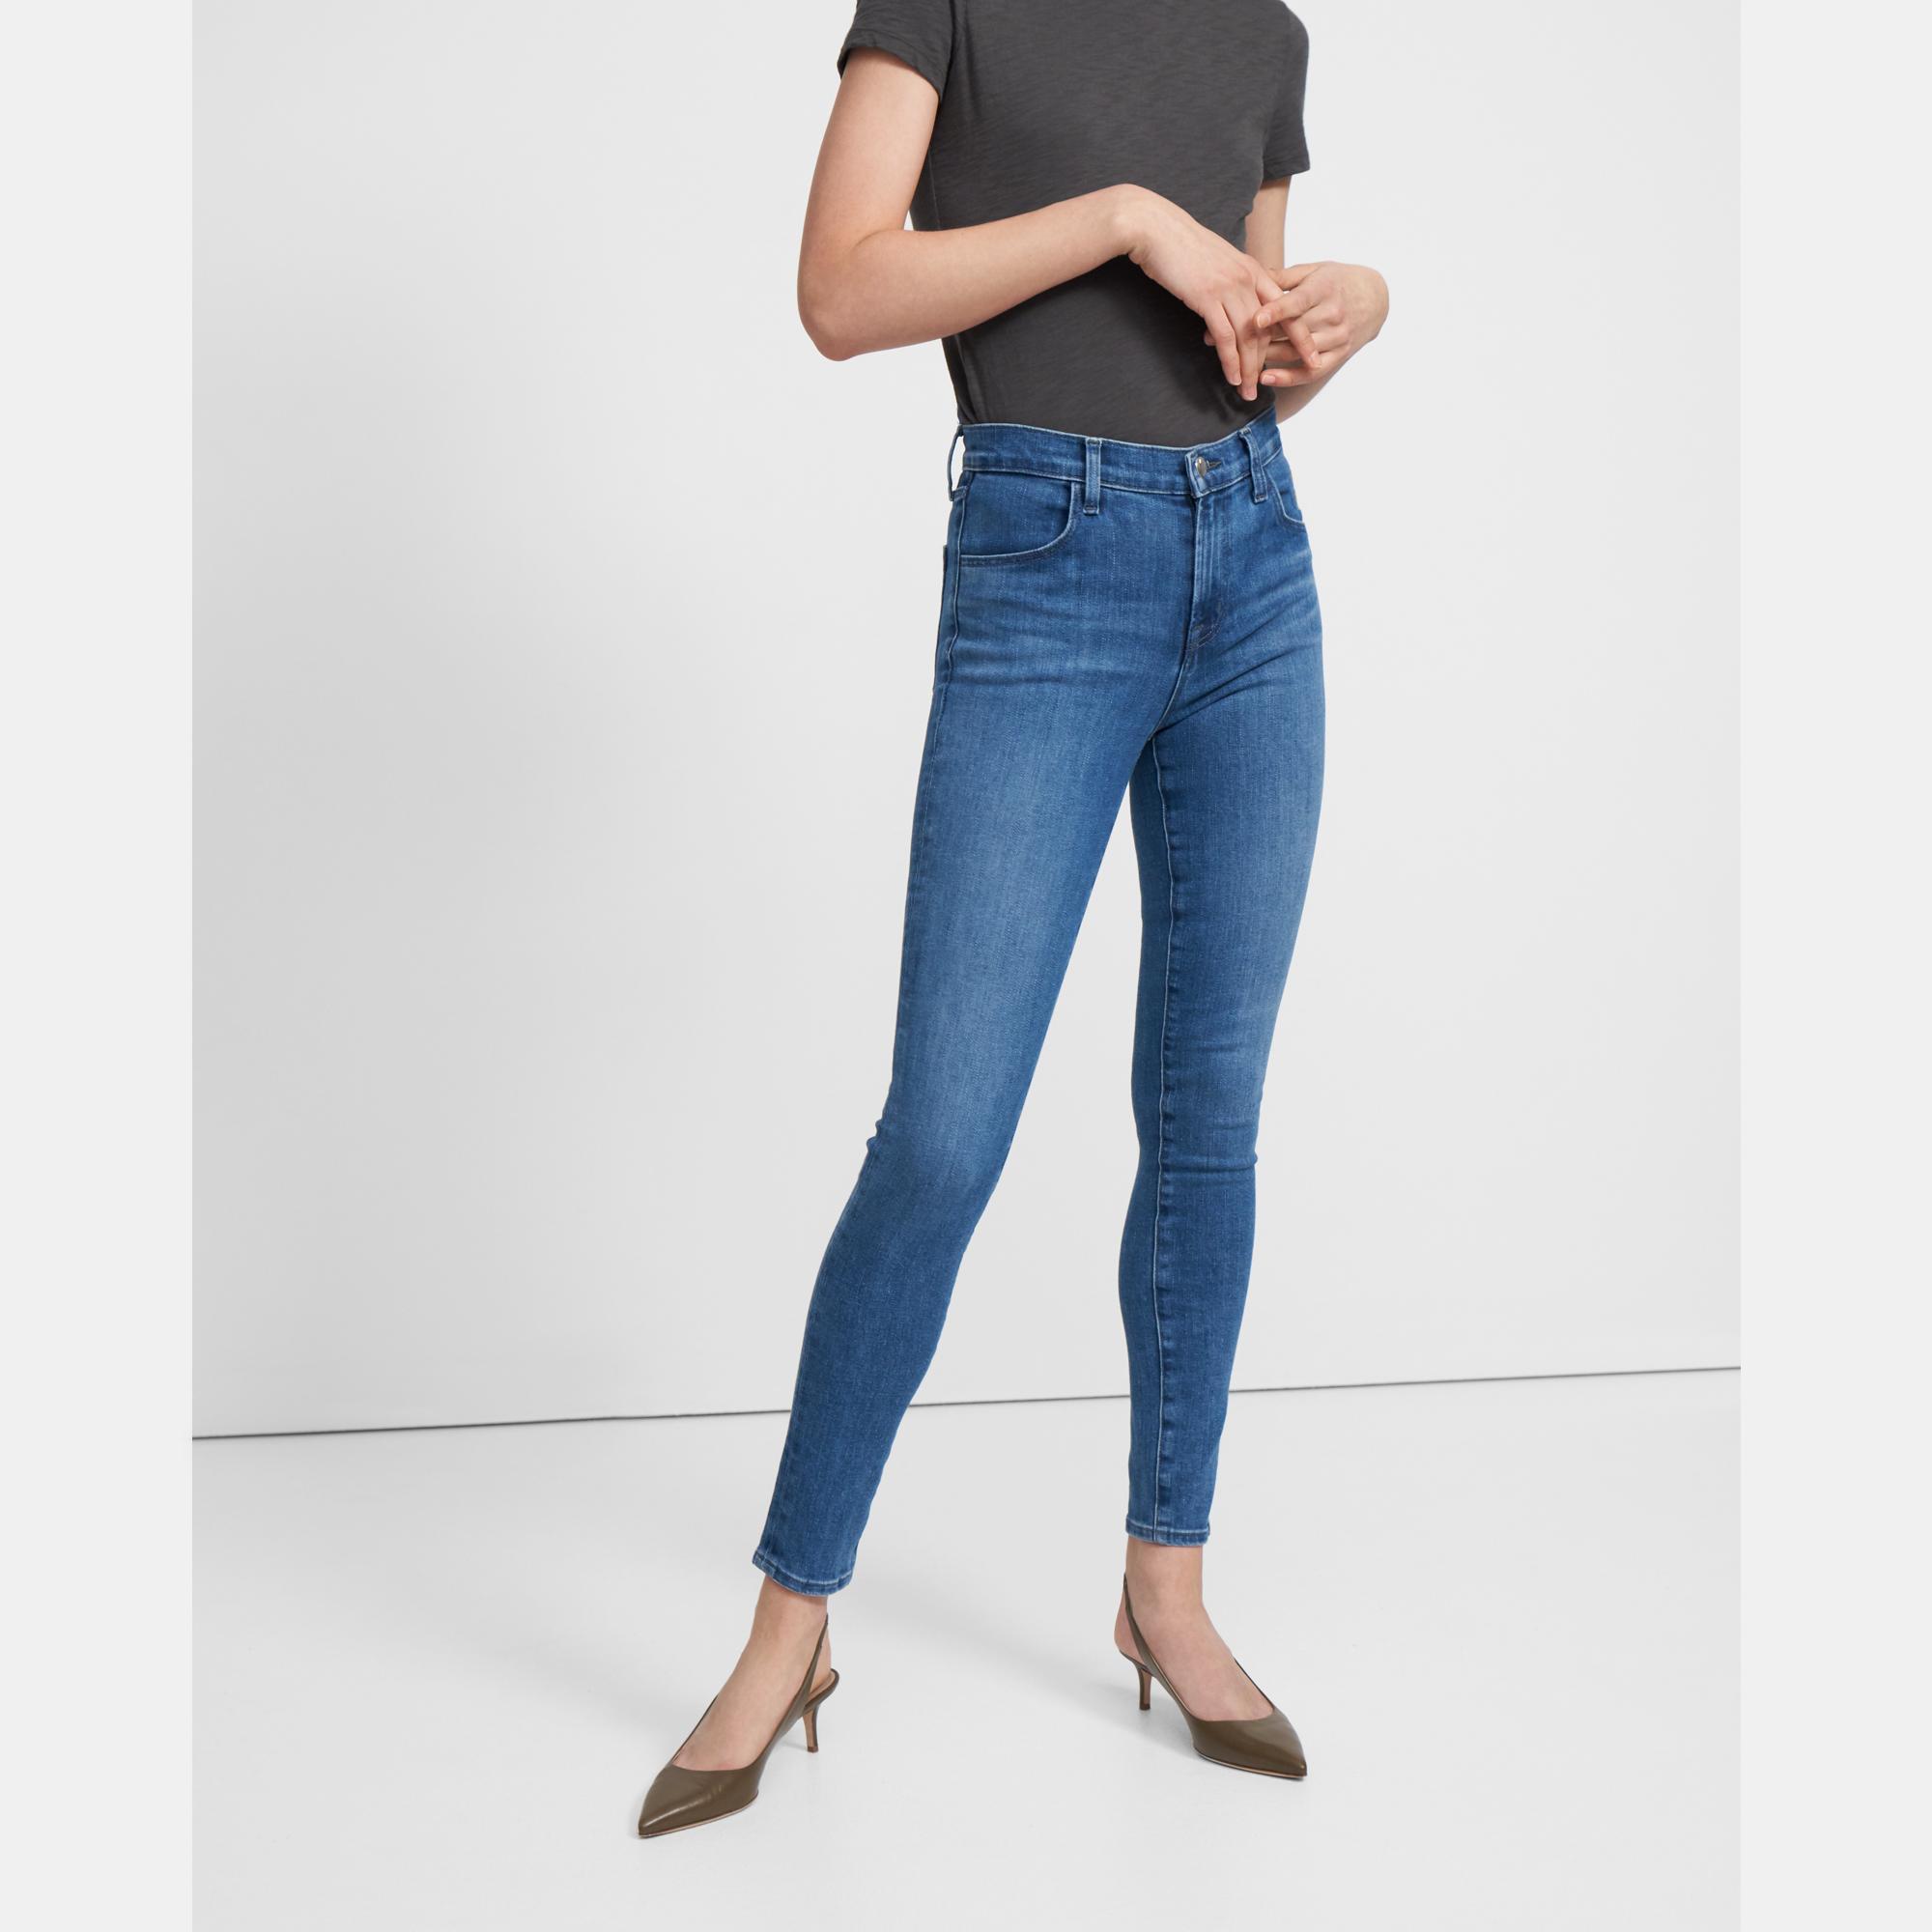 J Brand Jeans Women's 23110 Maria High Rise Skinny Jean, Black Heart, 24 :  : Clothing, Shoes & Accessories